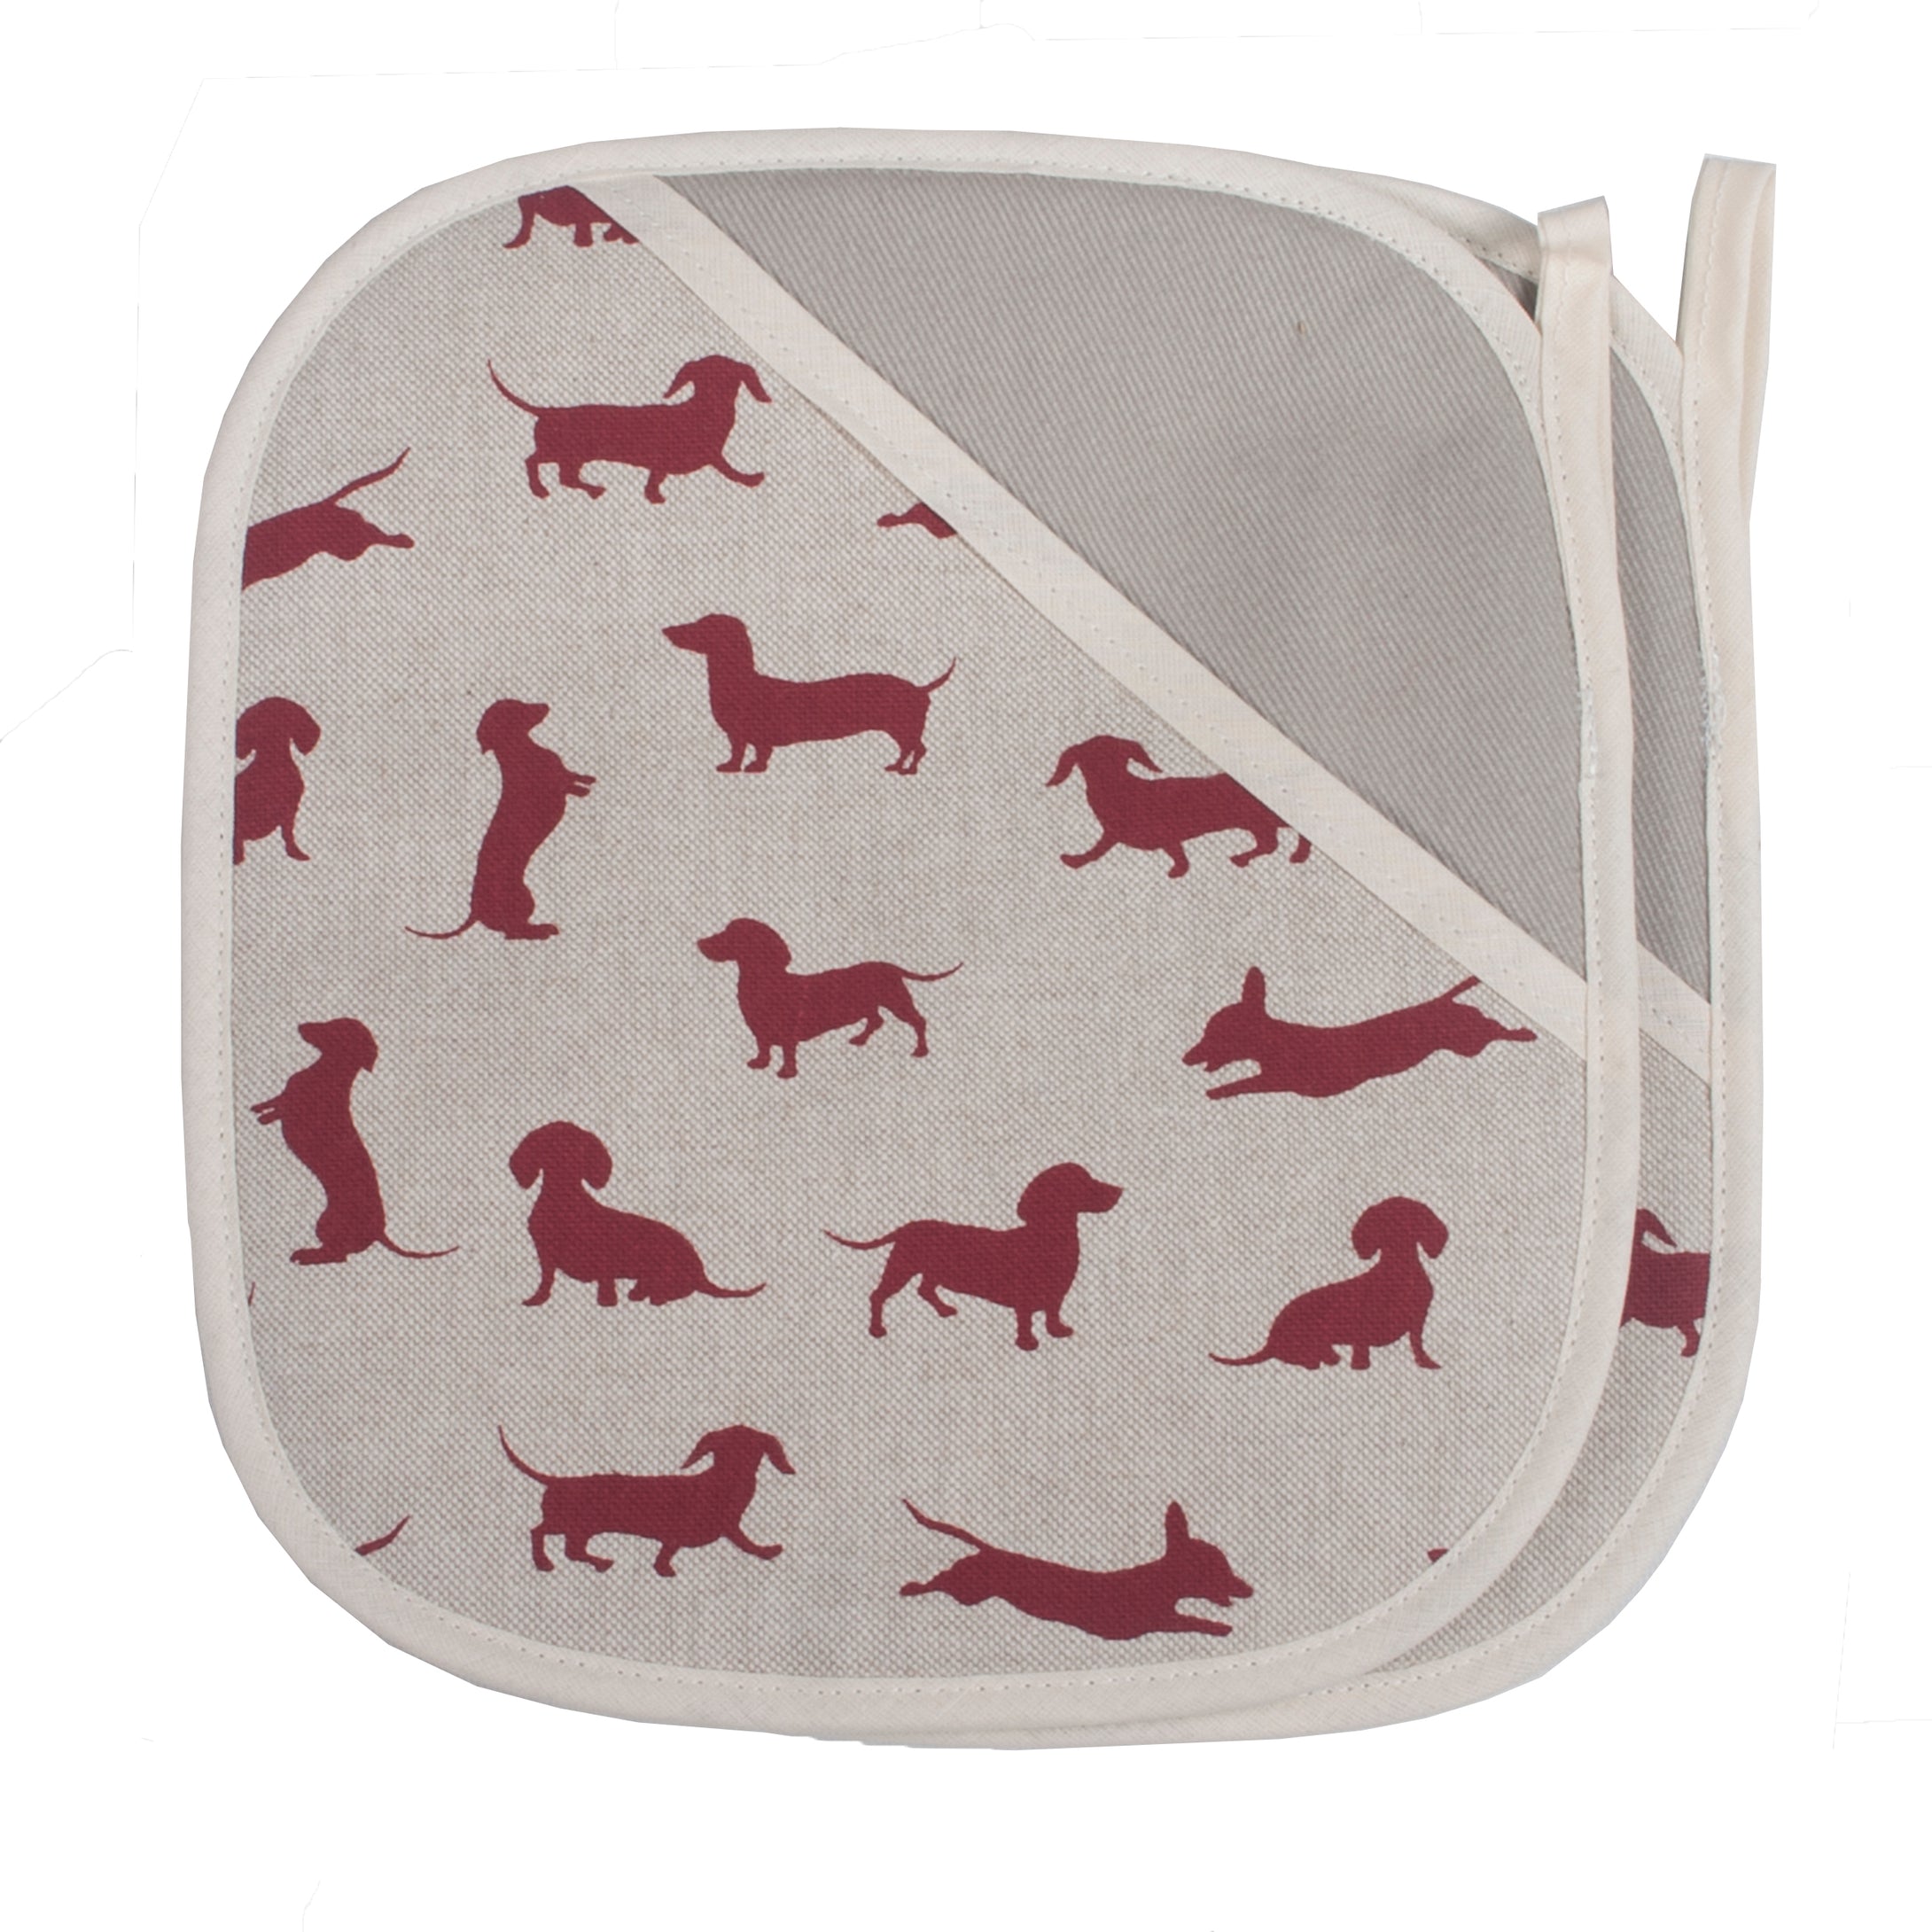 Oven Grippers, Red Dachshund (Pair)